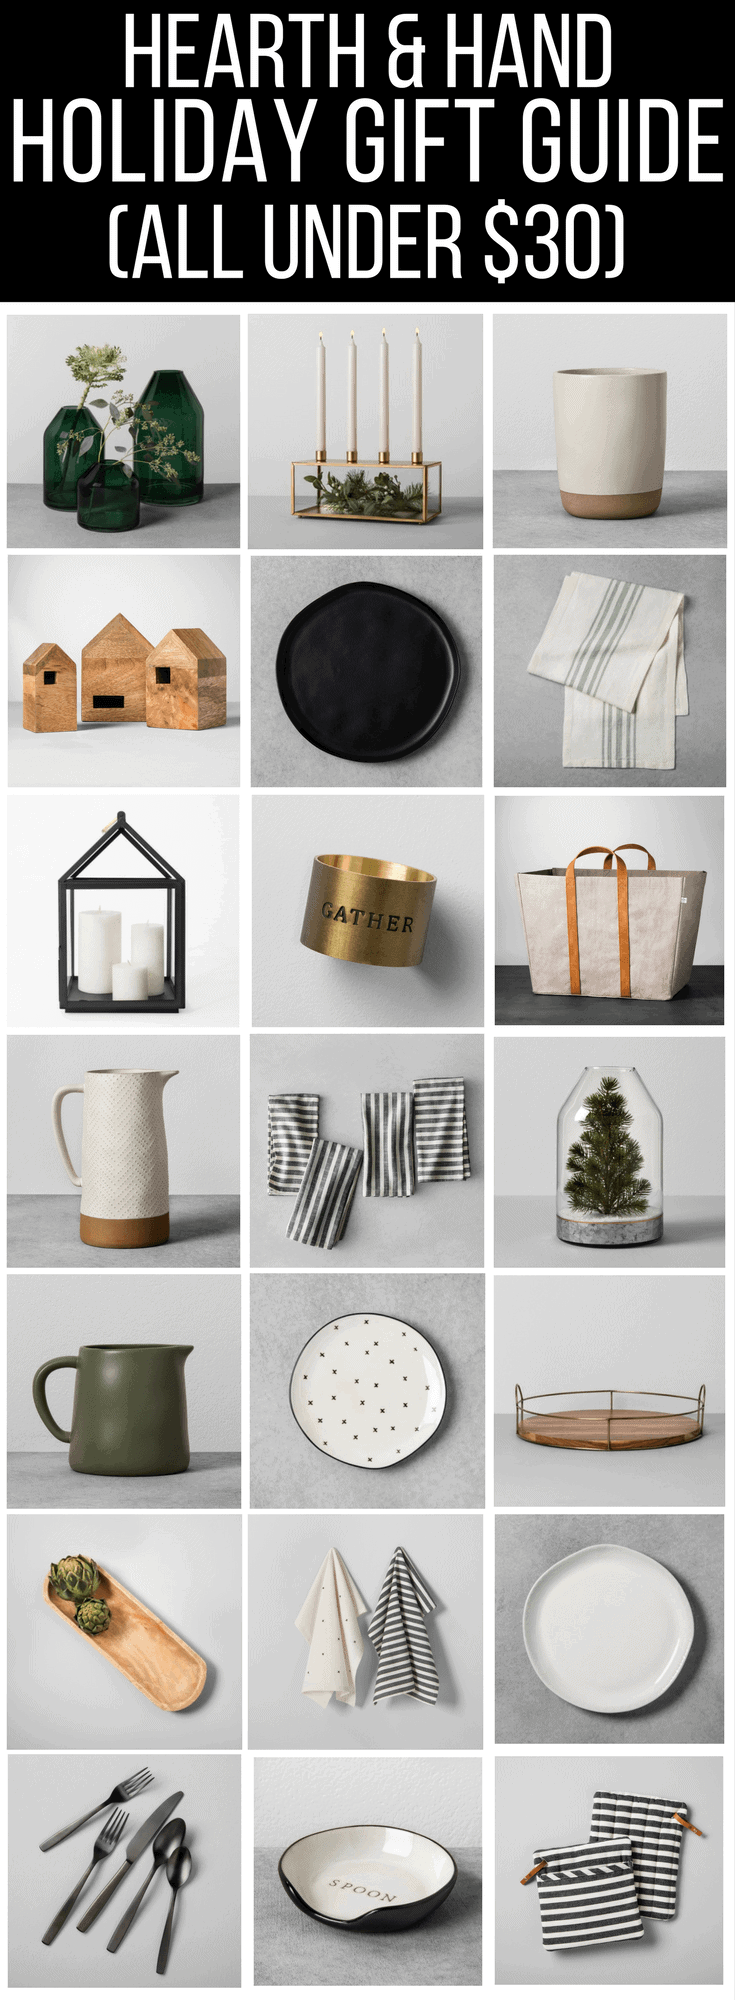 Holiday gift guide - ideas for Christmas gifts for her this Christmas season. Beautiful home decor gifts from the Hearth & Hand Magnolia collection at Target. 